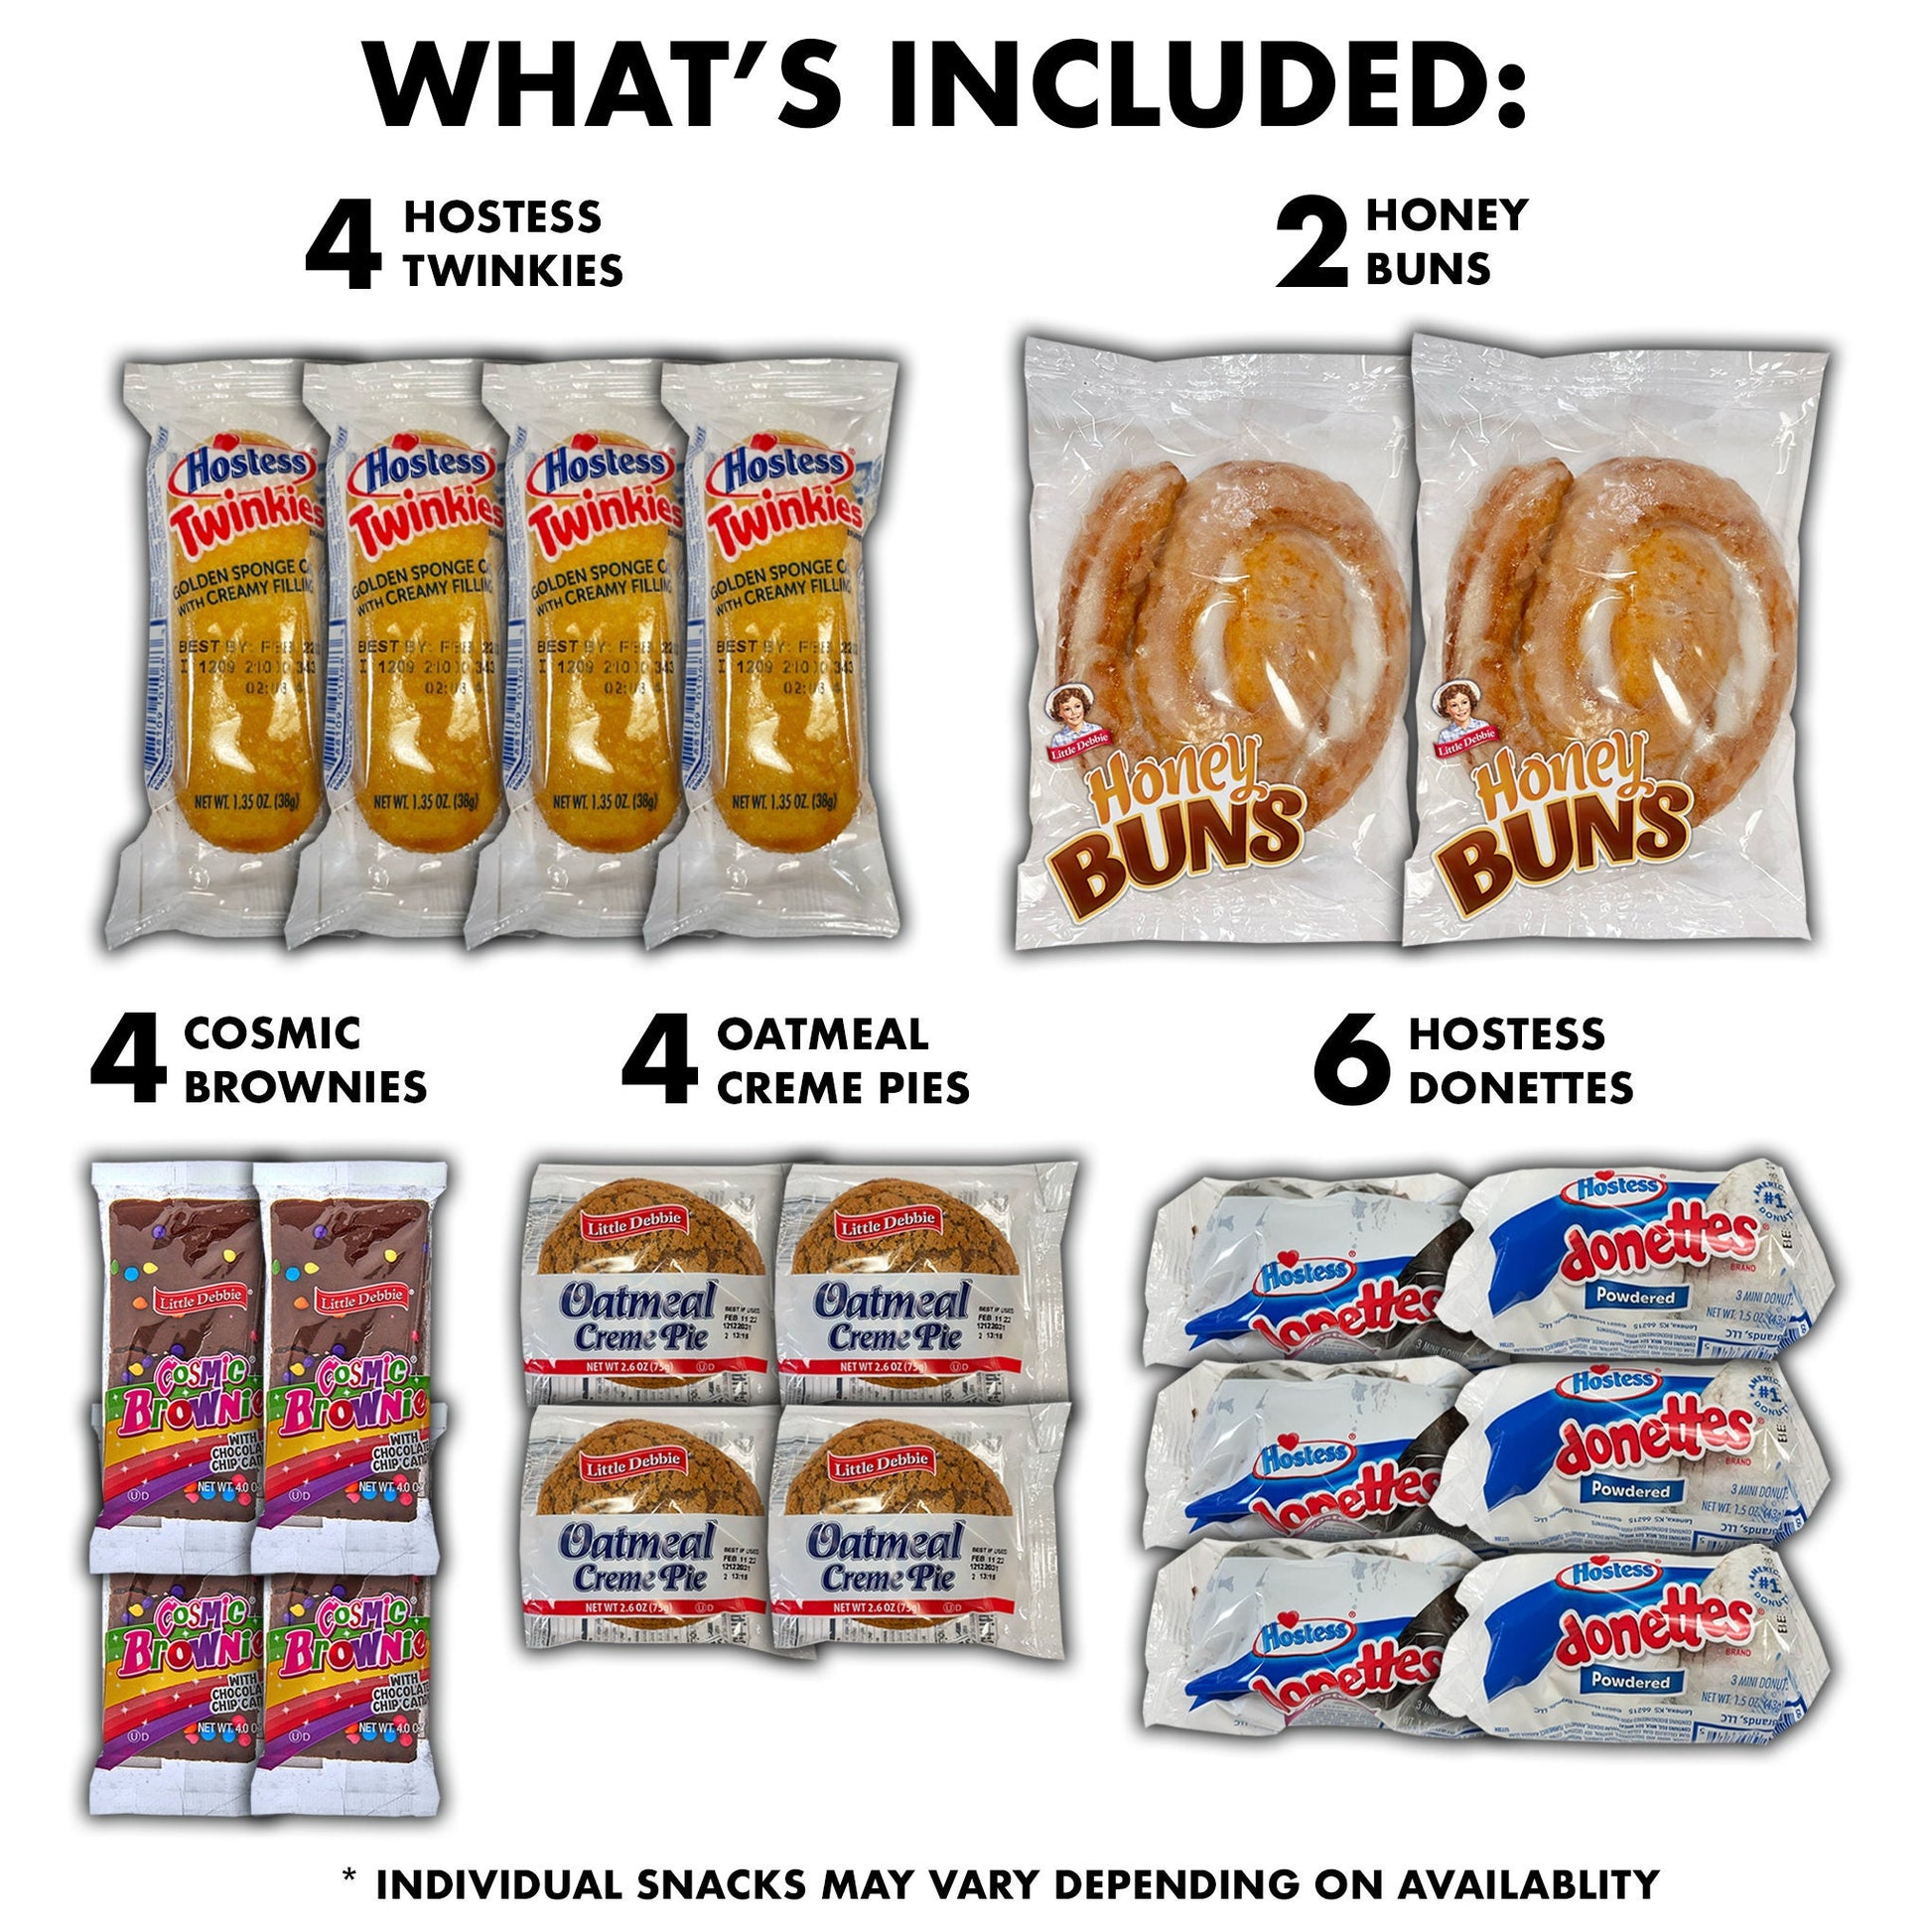 Hostess Twinkies, Honey buns, Cosmic Brownies, Oatmeal Creme Pies, Hostess Donettes